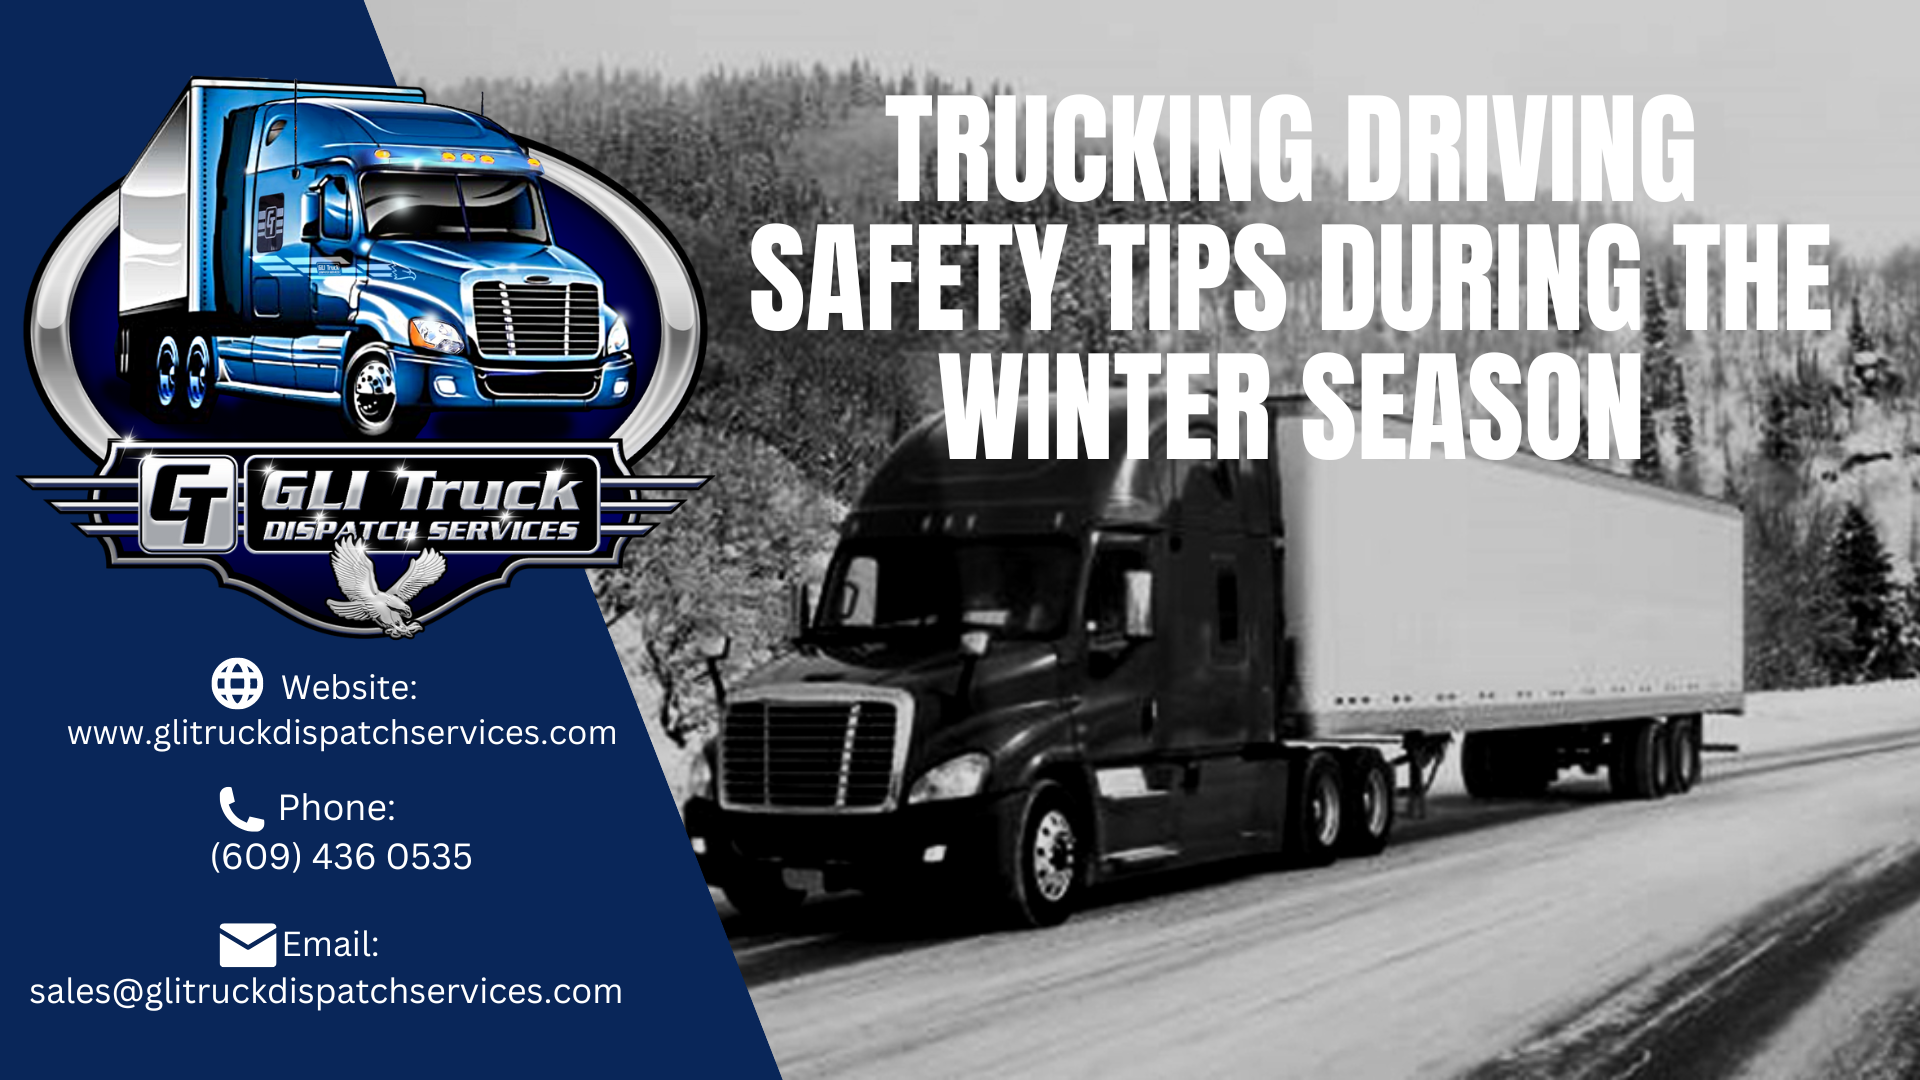 Trucking driving safety tips during the winter season